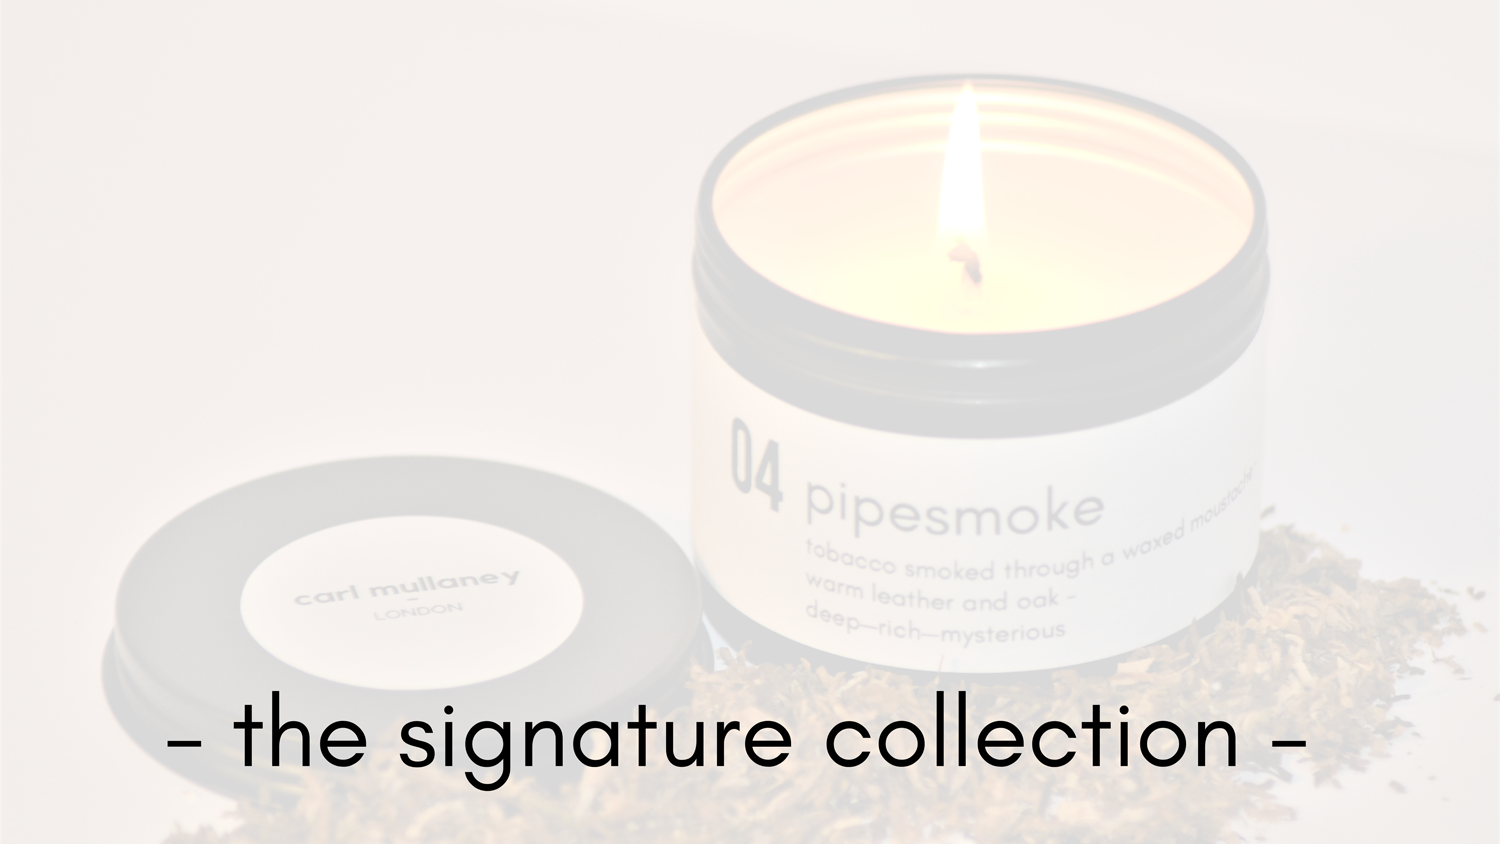 Carl Mullaney London - The Signature Collection - 04 Pipesmoke - soy candle